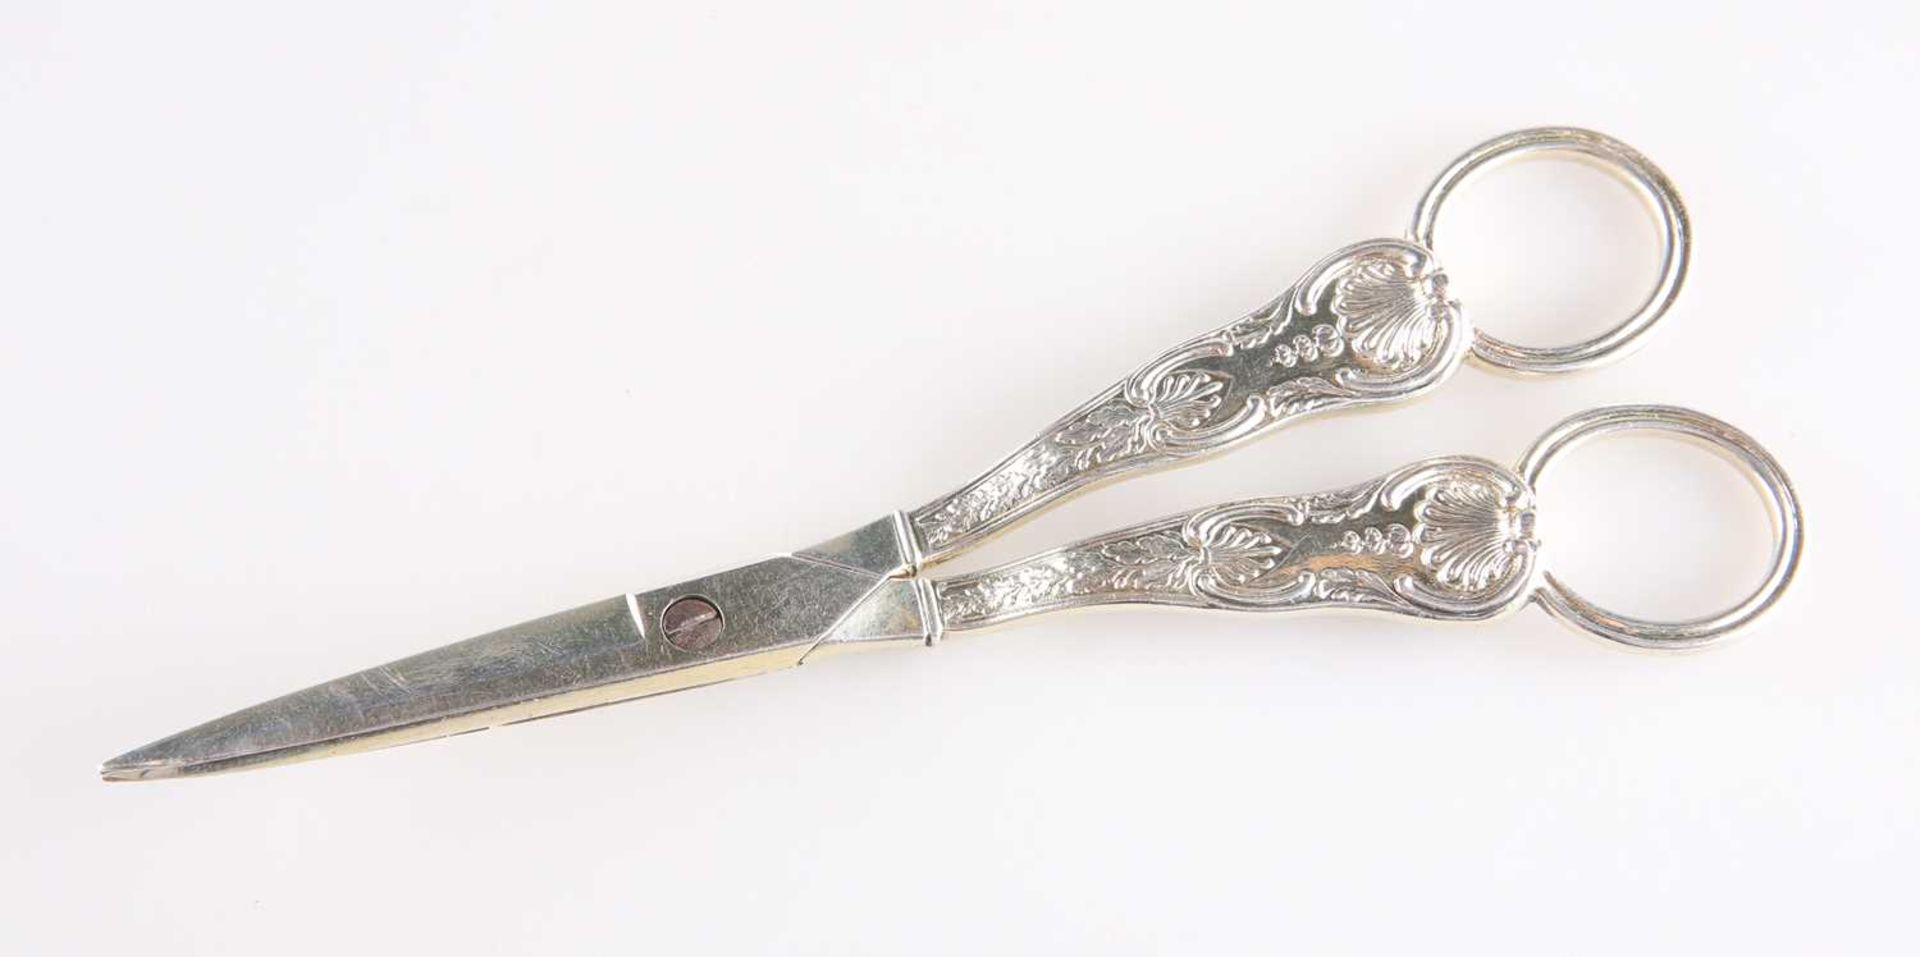 A PAIR OF GEORGE III SILVER KING'S HONEYSUCKLE PATTERN GRAPE SHEARS - Image 2 of 3